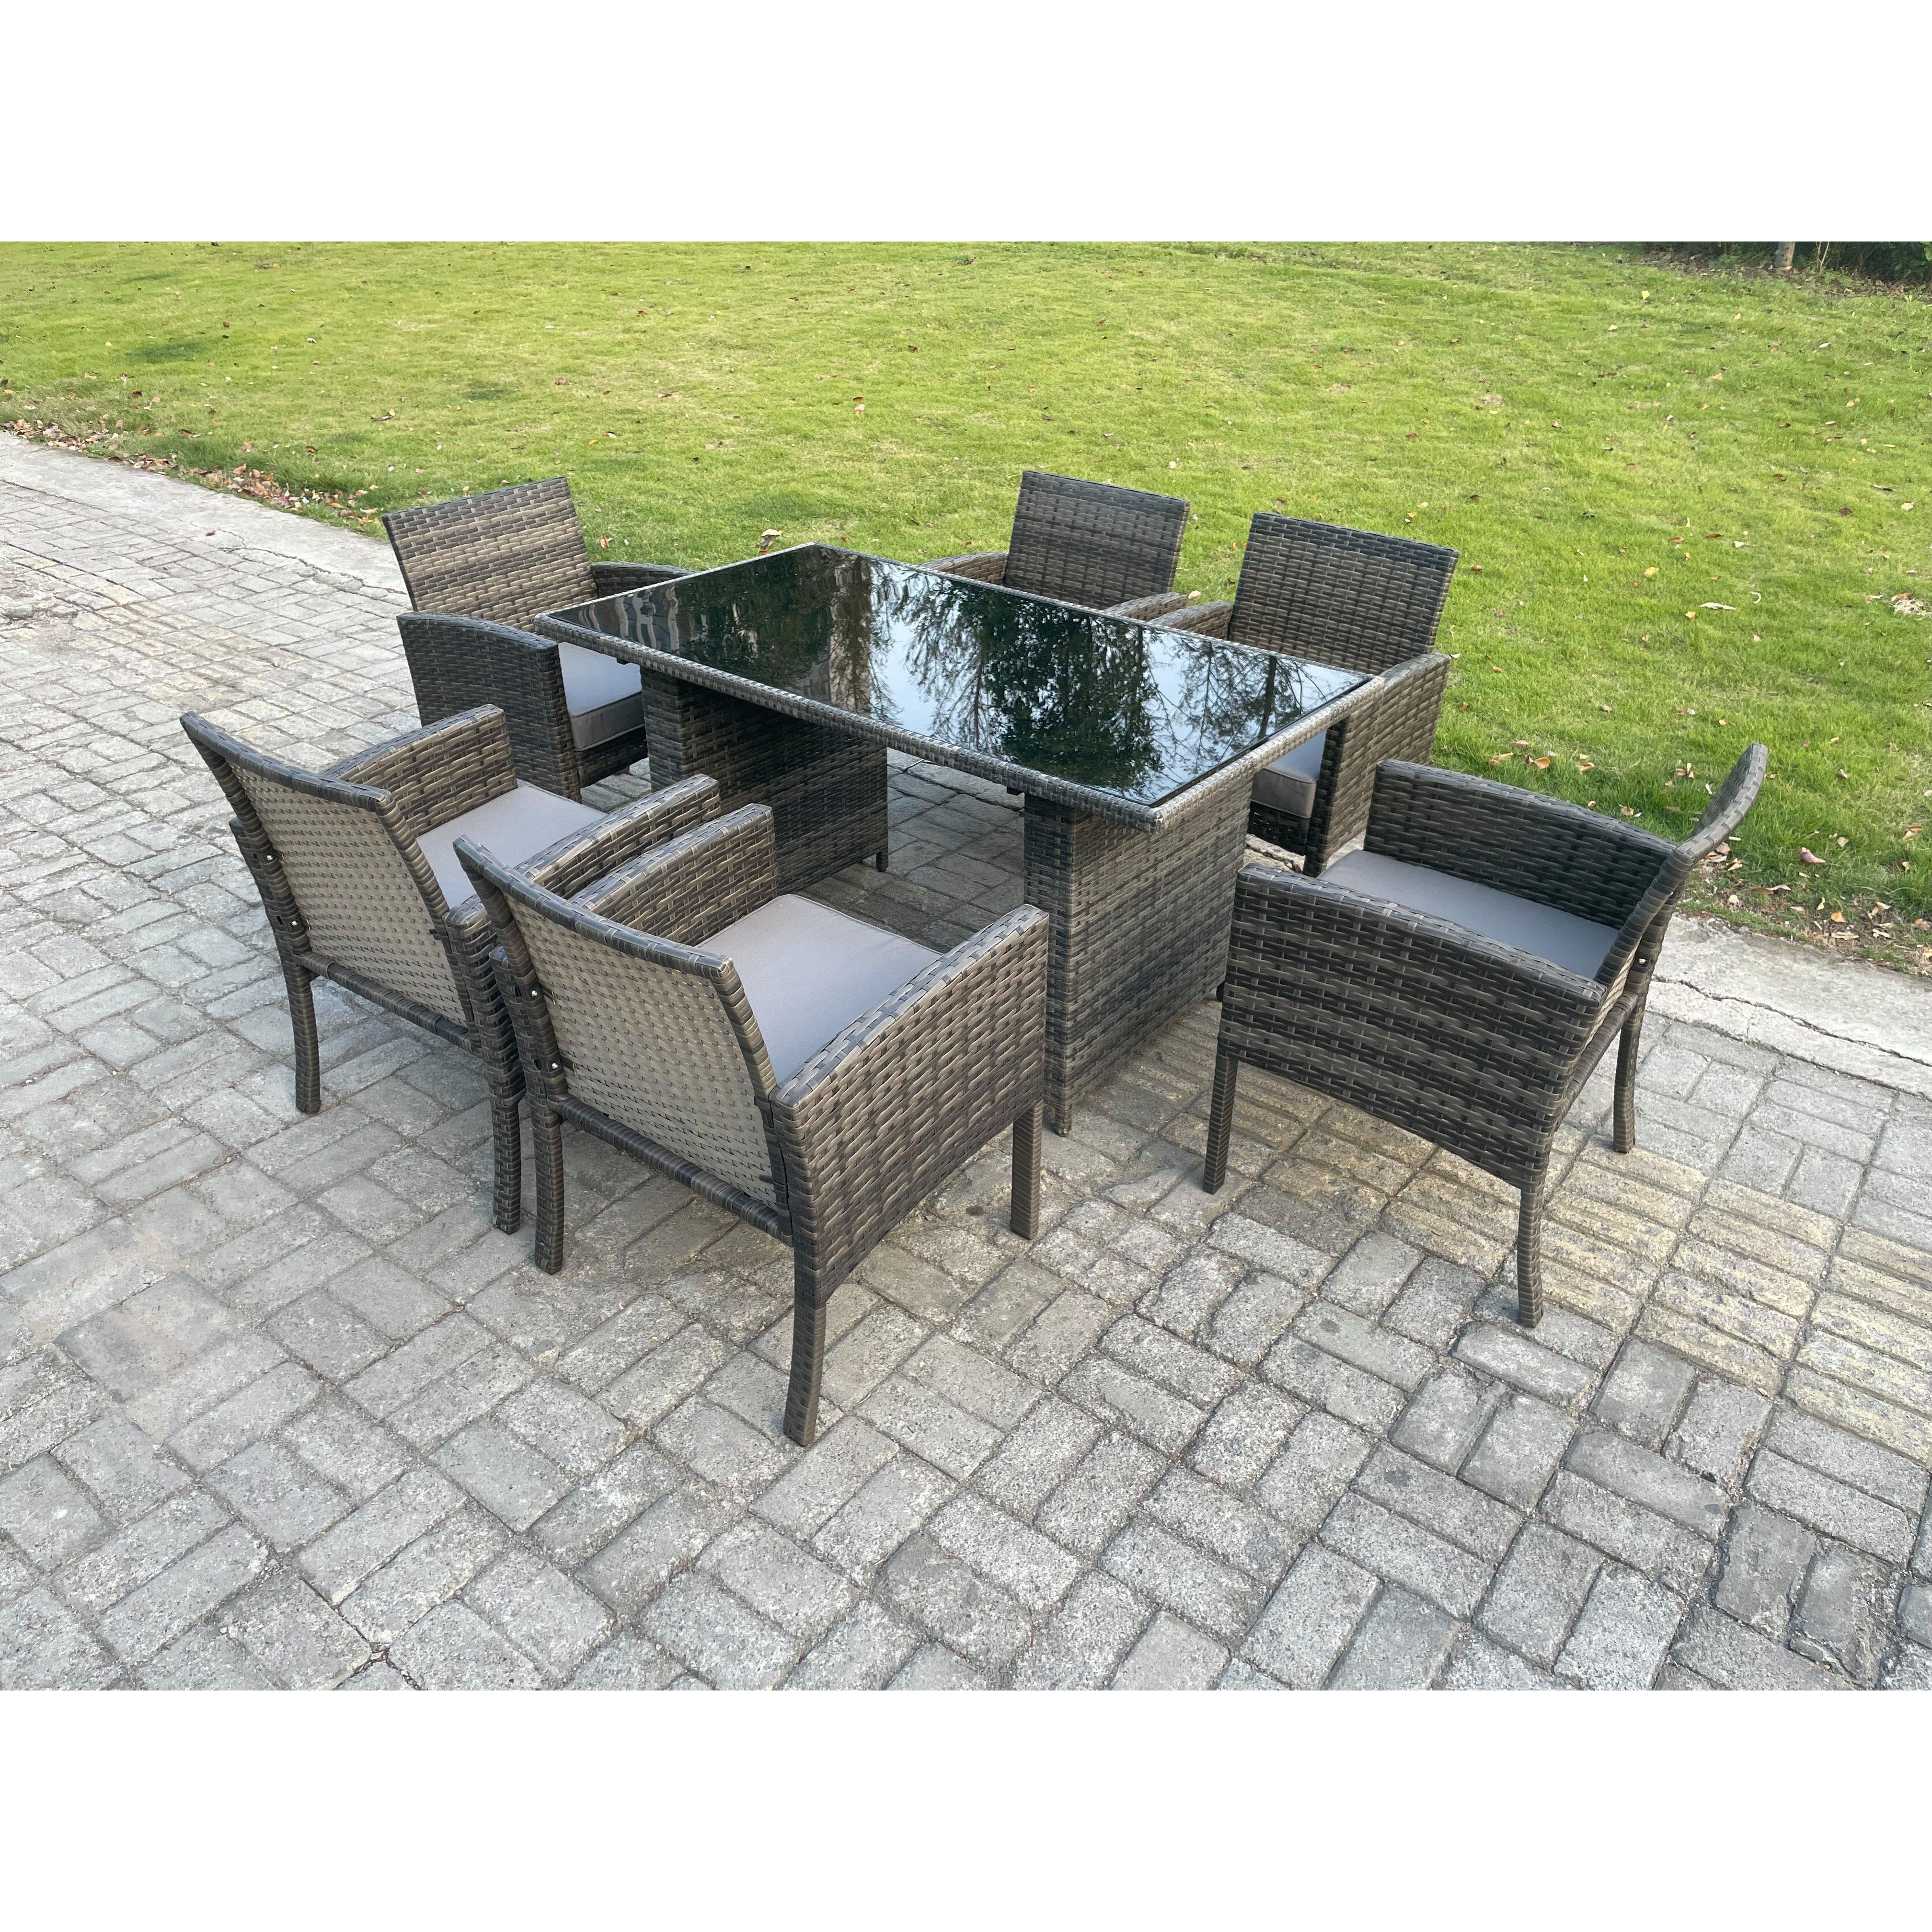 Wicker PE Outdoor Rattan Garden Furniture Arm Chair And Table Dining Sets 6 Seater Rectangular Table Dark Grey Mixed - image 1